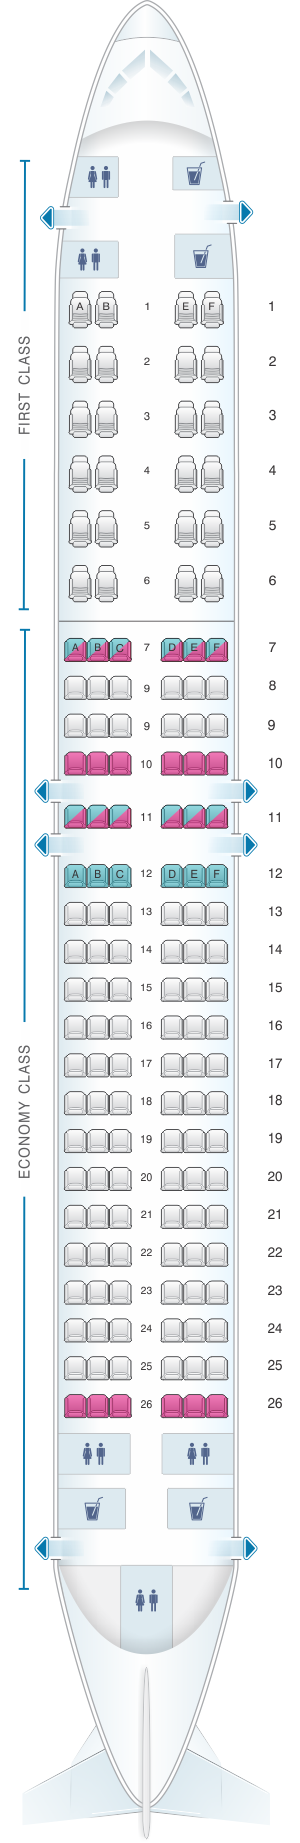 Seat map for Air Algerie Boeing B737-800 config 2